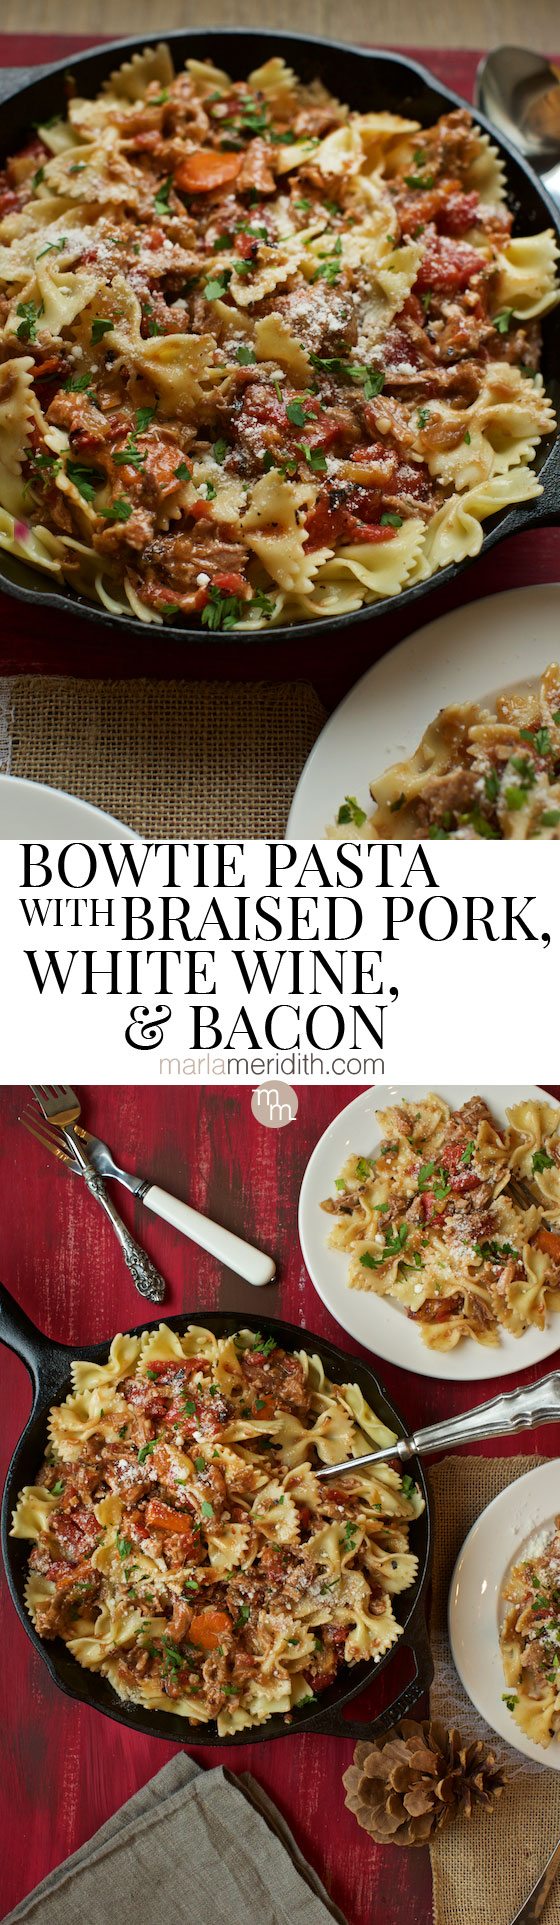 Bow Tie Pasta with Braised Pork, White Wine and Bacon recipe @PorkBeInspired #porkbeinspired on MarlaMeridith.com ( @marlameridith )